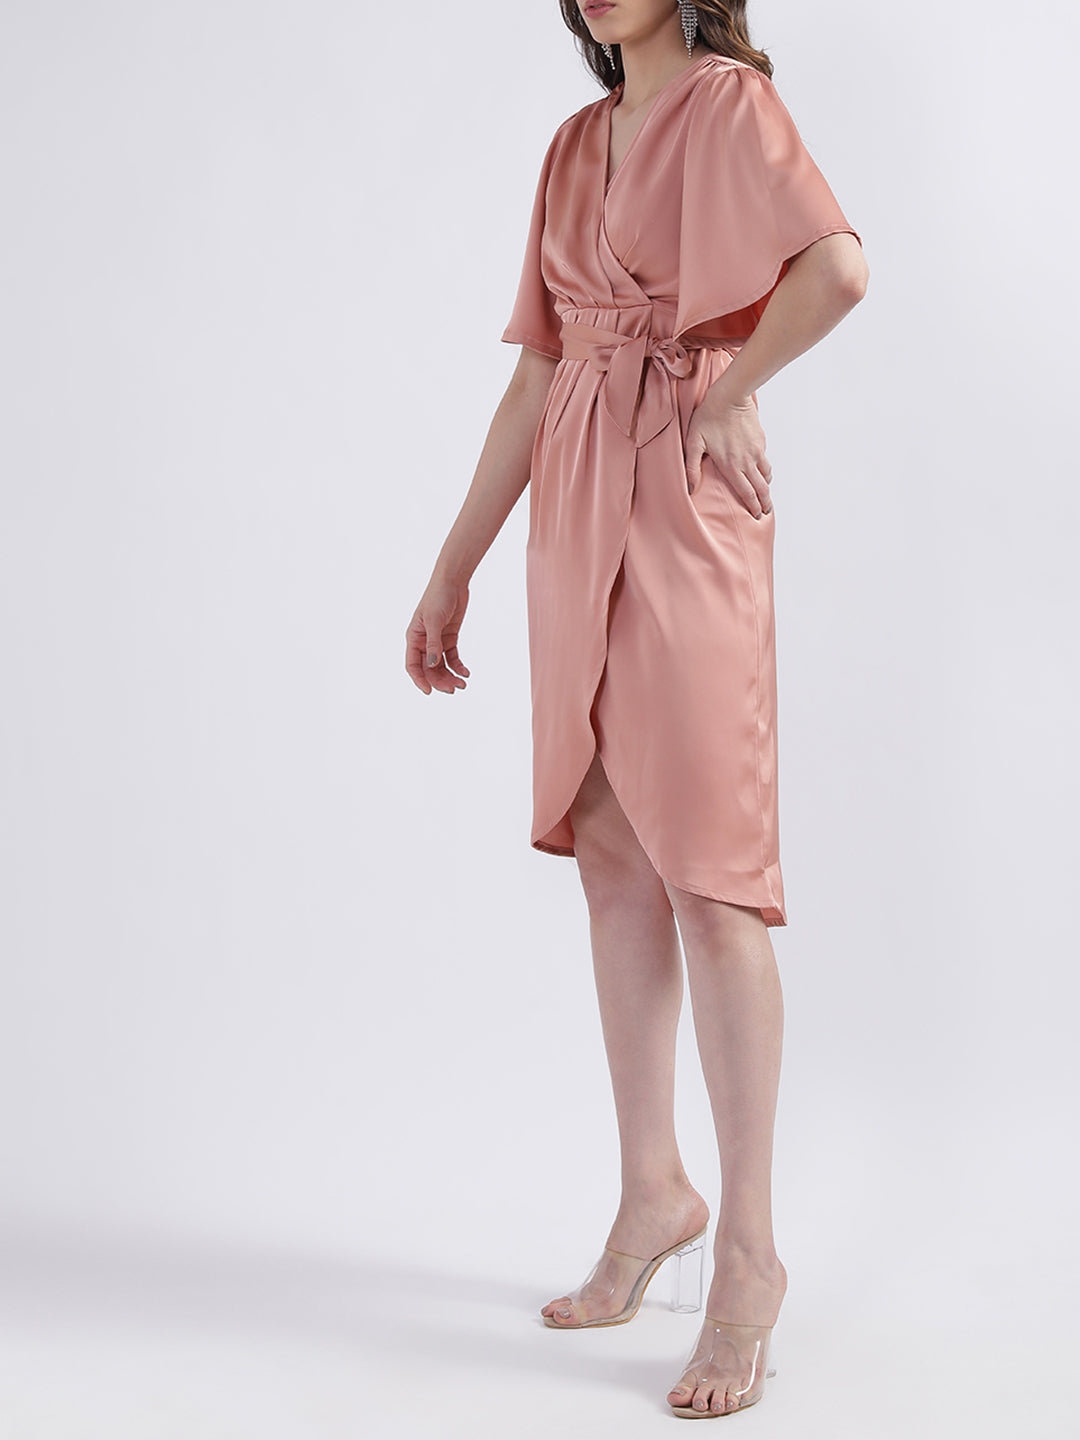 Centre Stage Women Peach Solid V Neck Dress